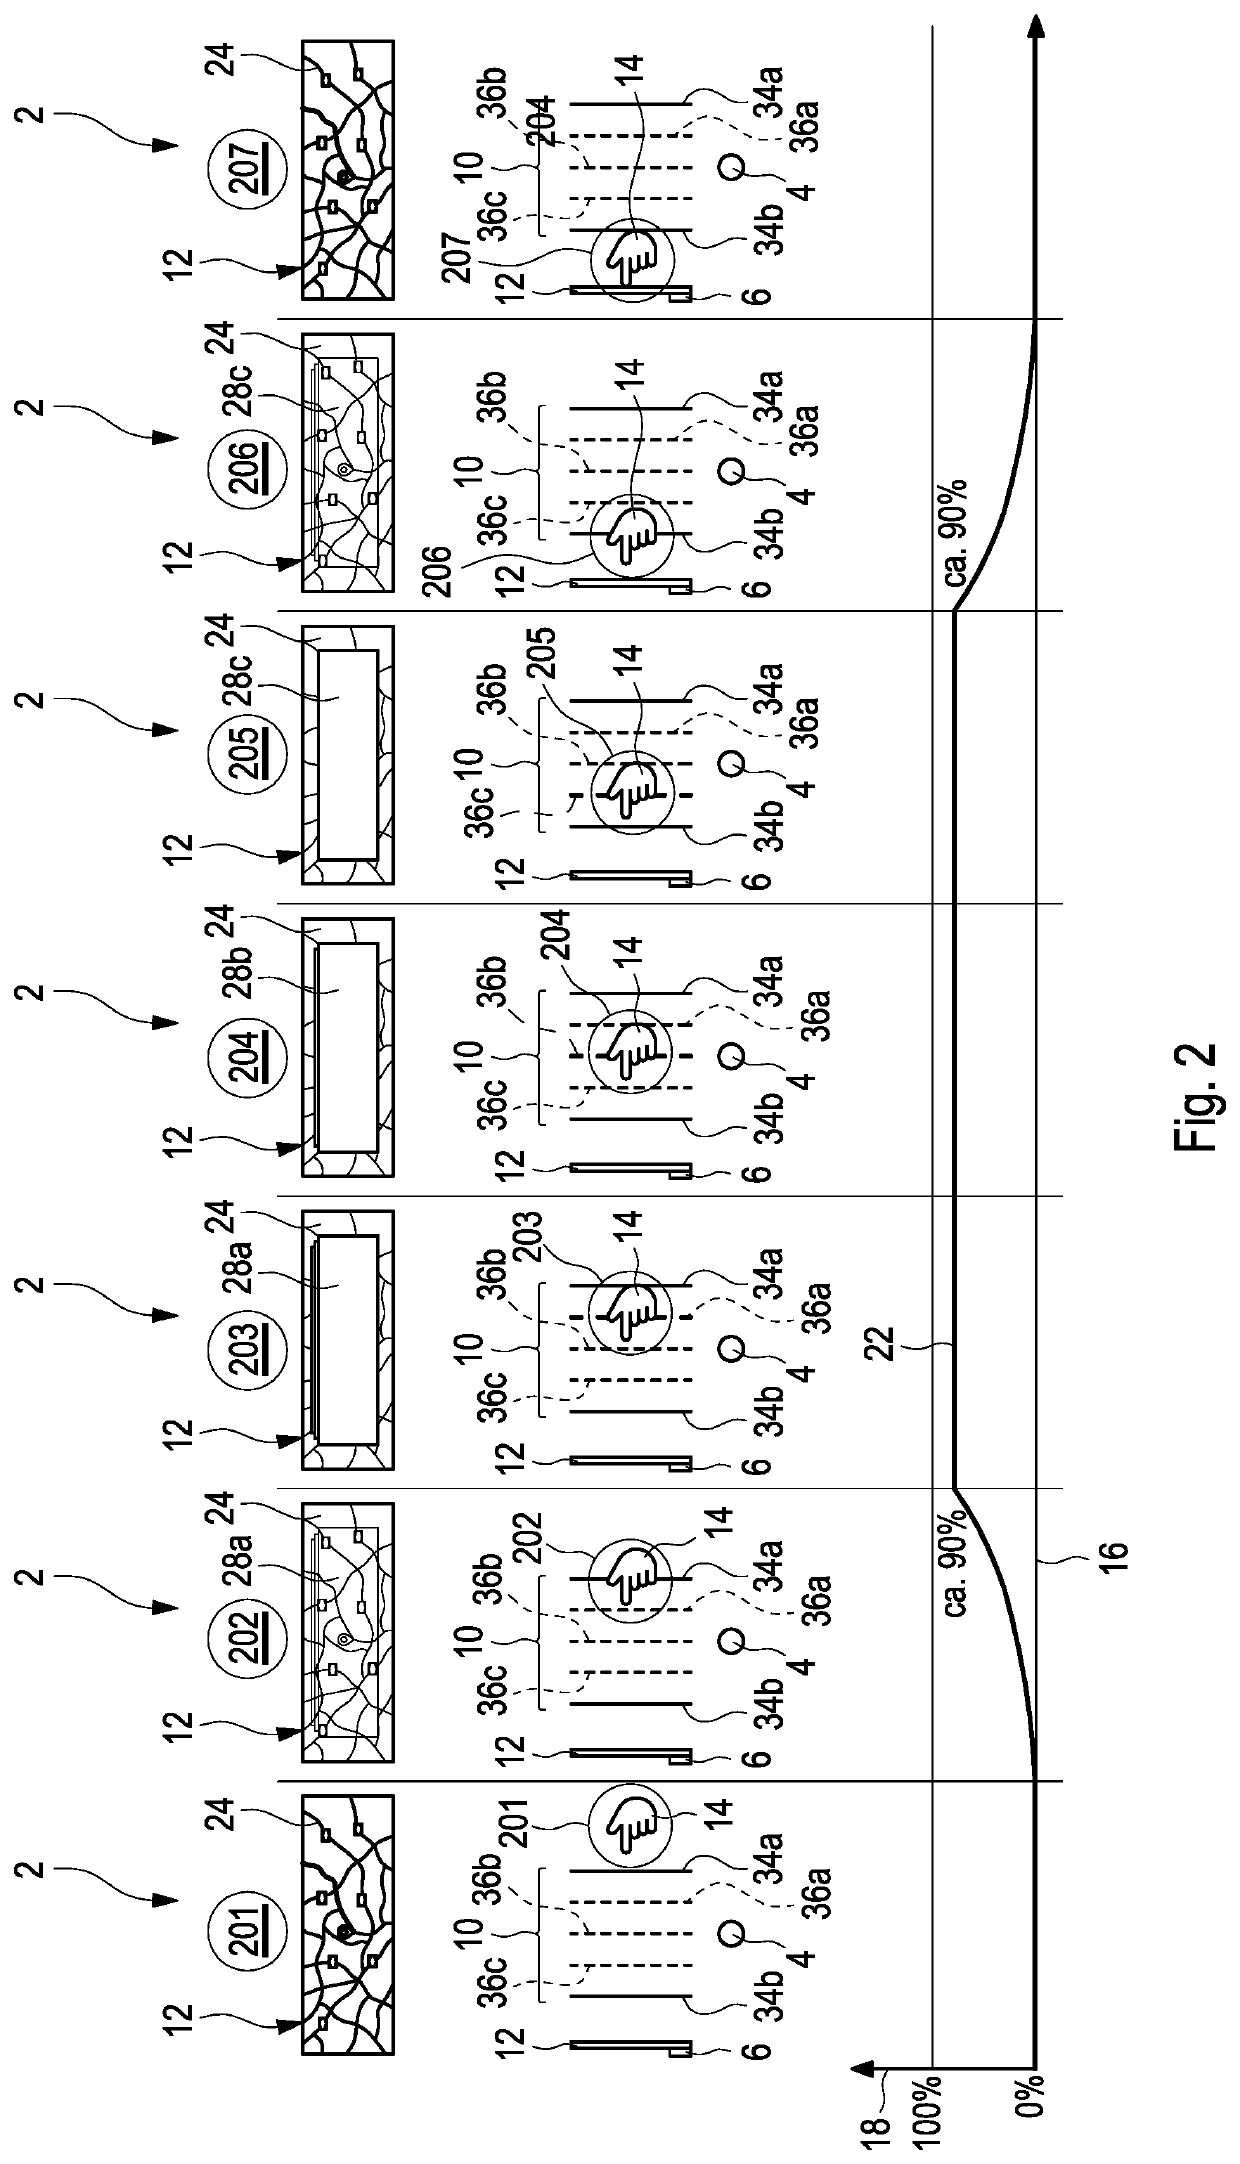 Method for displaying at least one additional item of display content